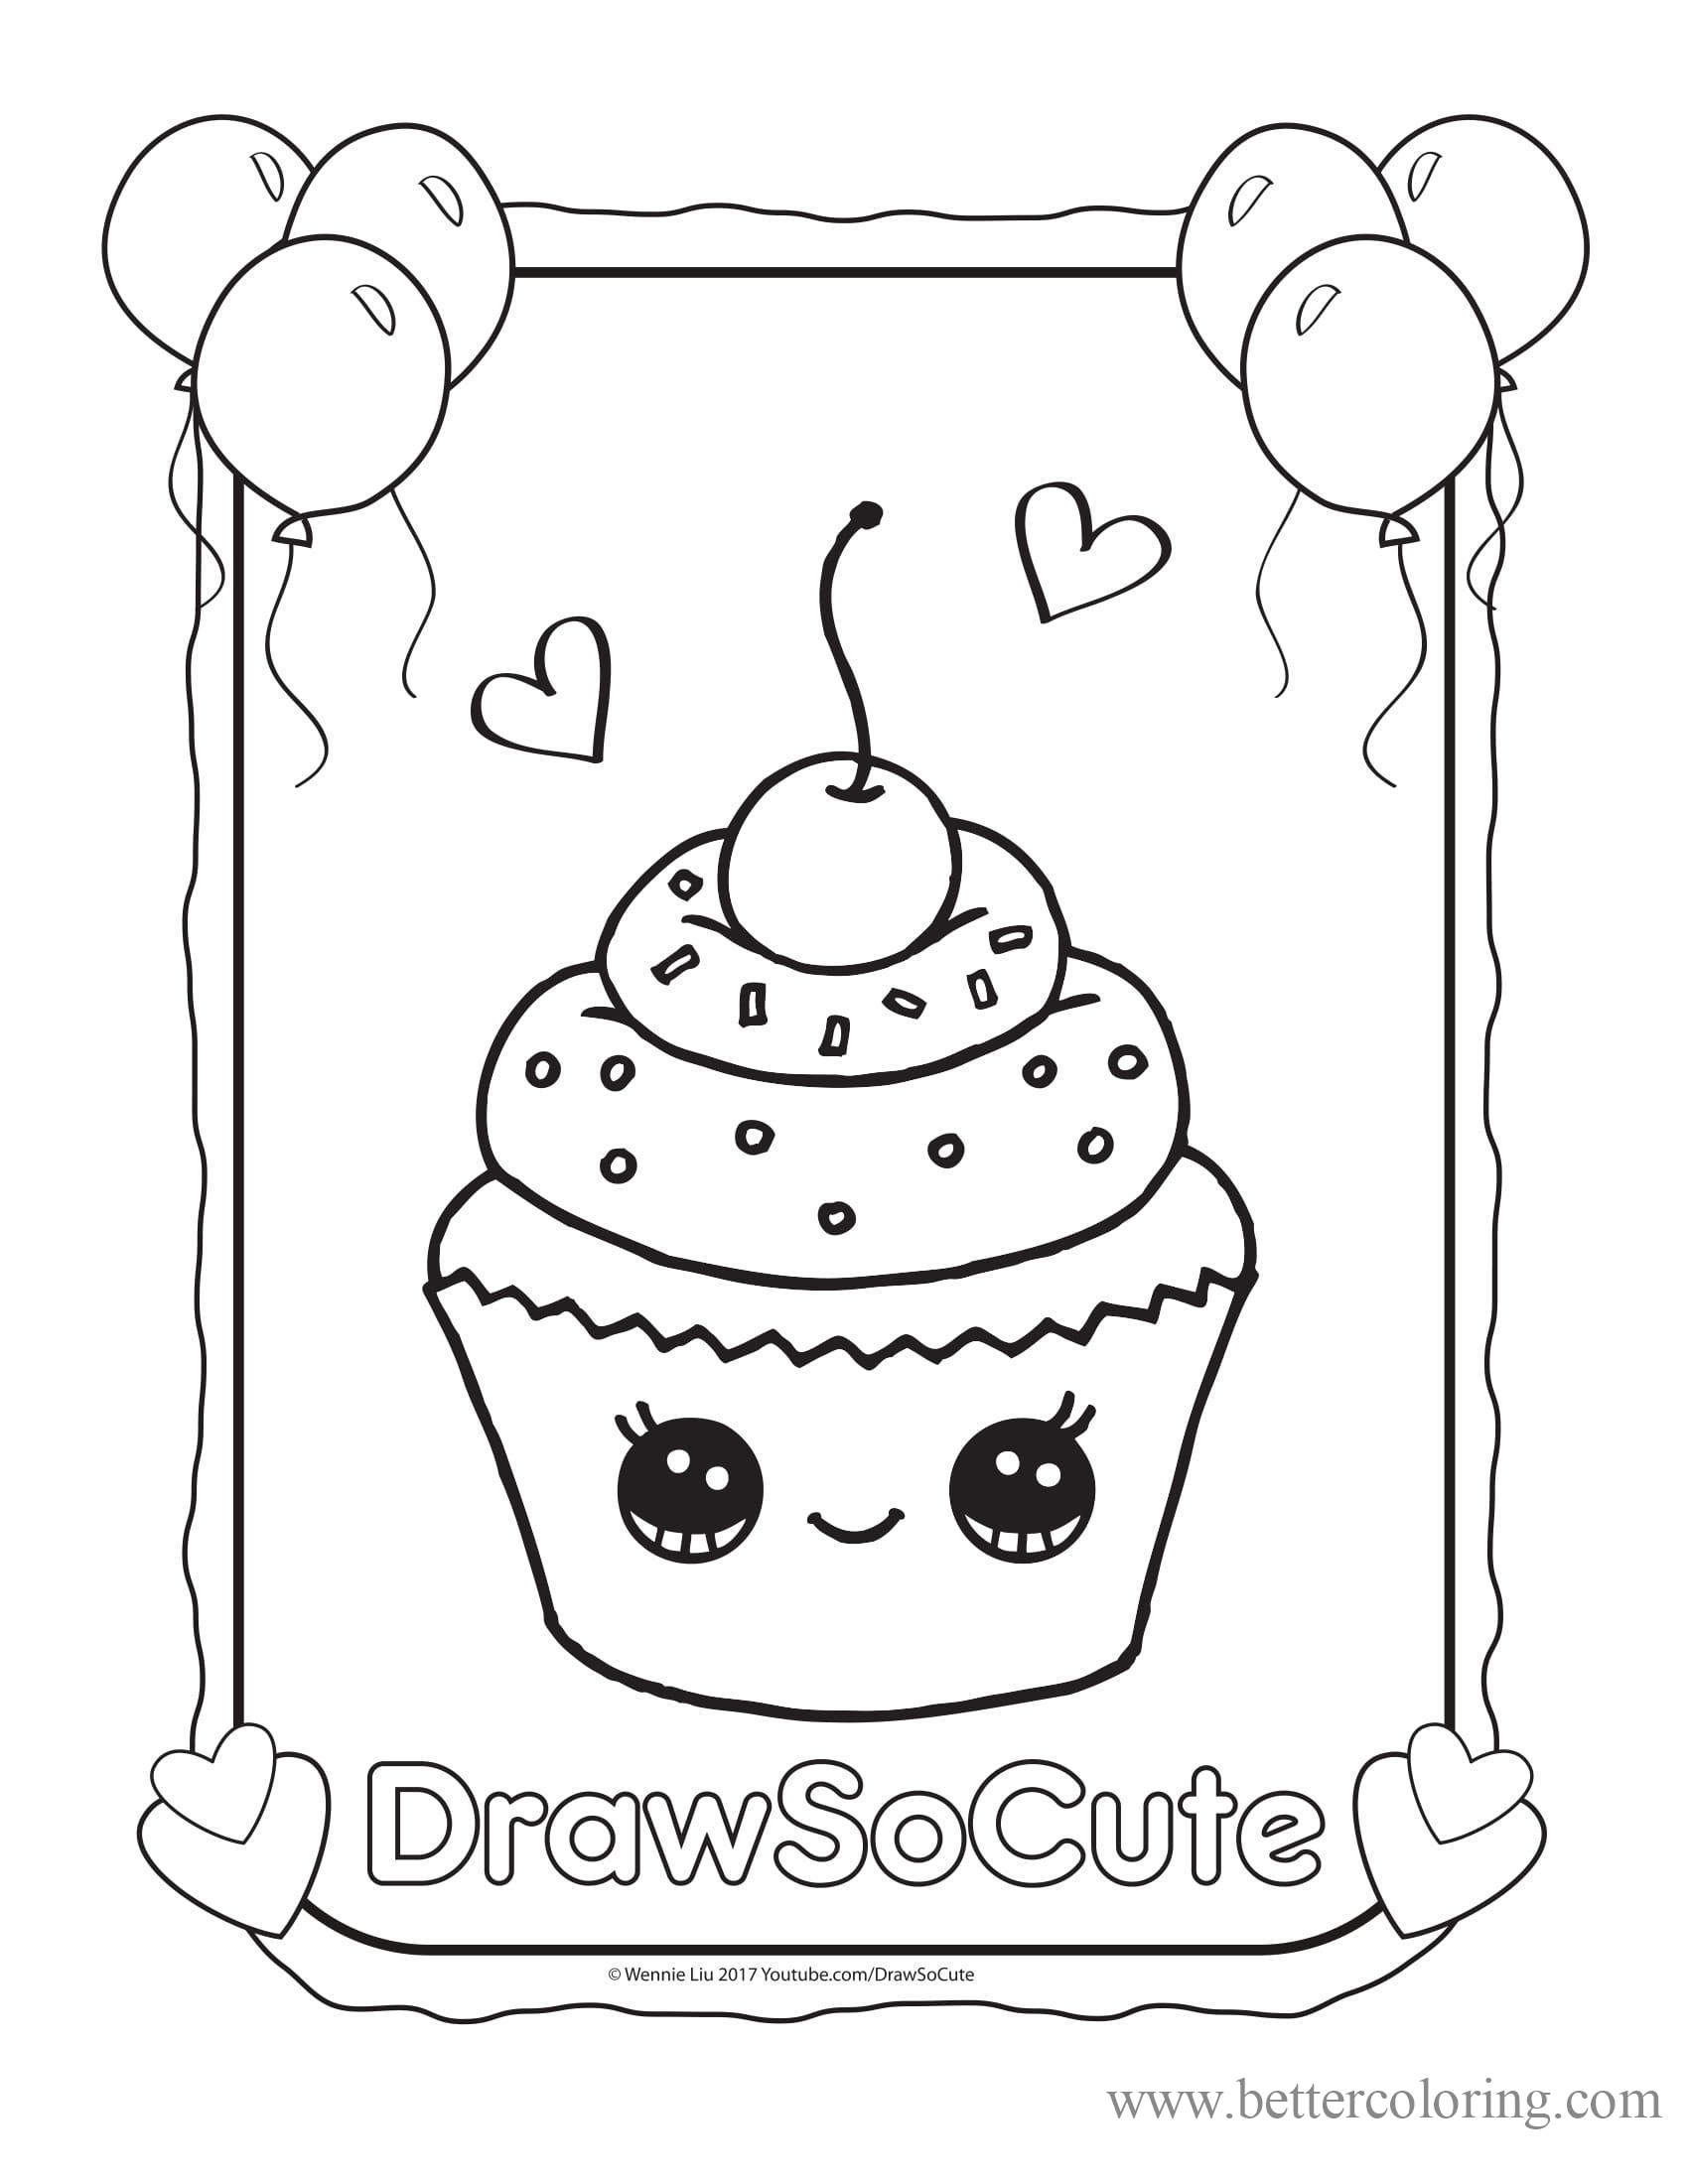 Free Draw So Cute Cupcake Coloring Pages printable